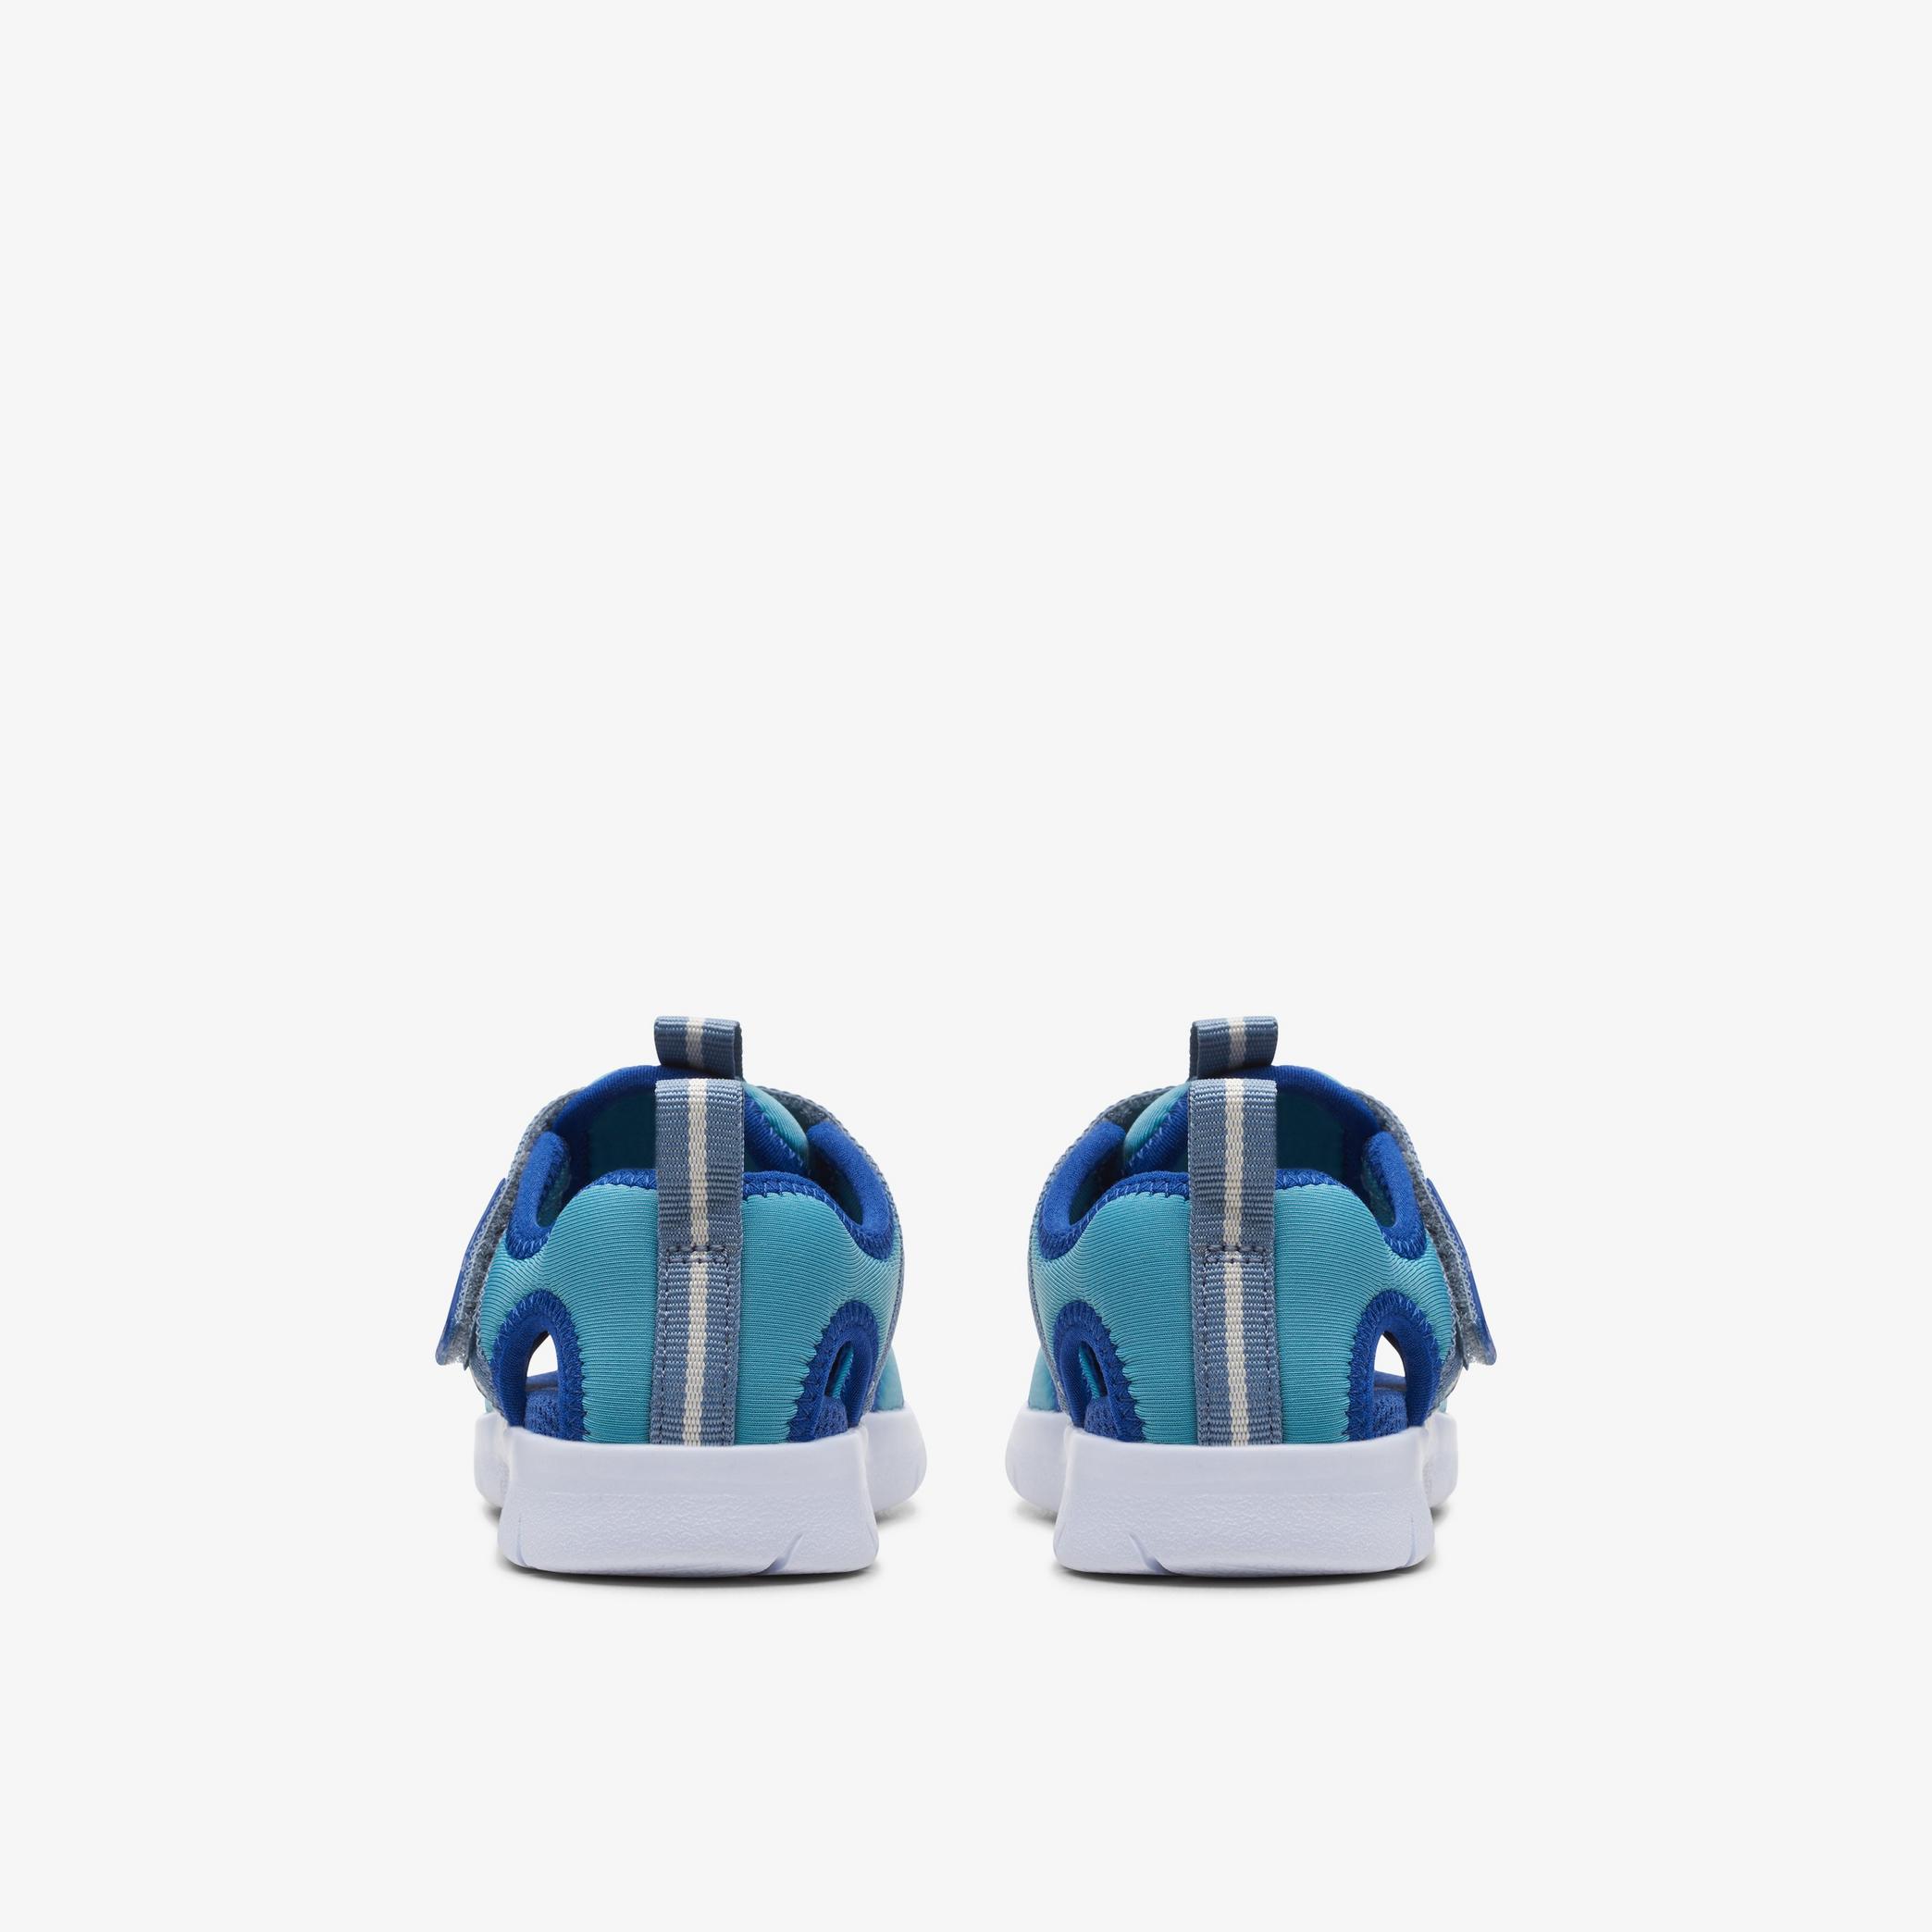 Ath Water Toddler Blue Combination Sandals, view 5 of 6